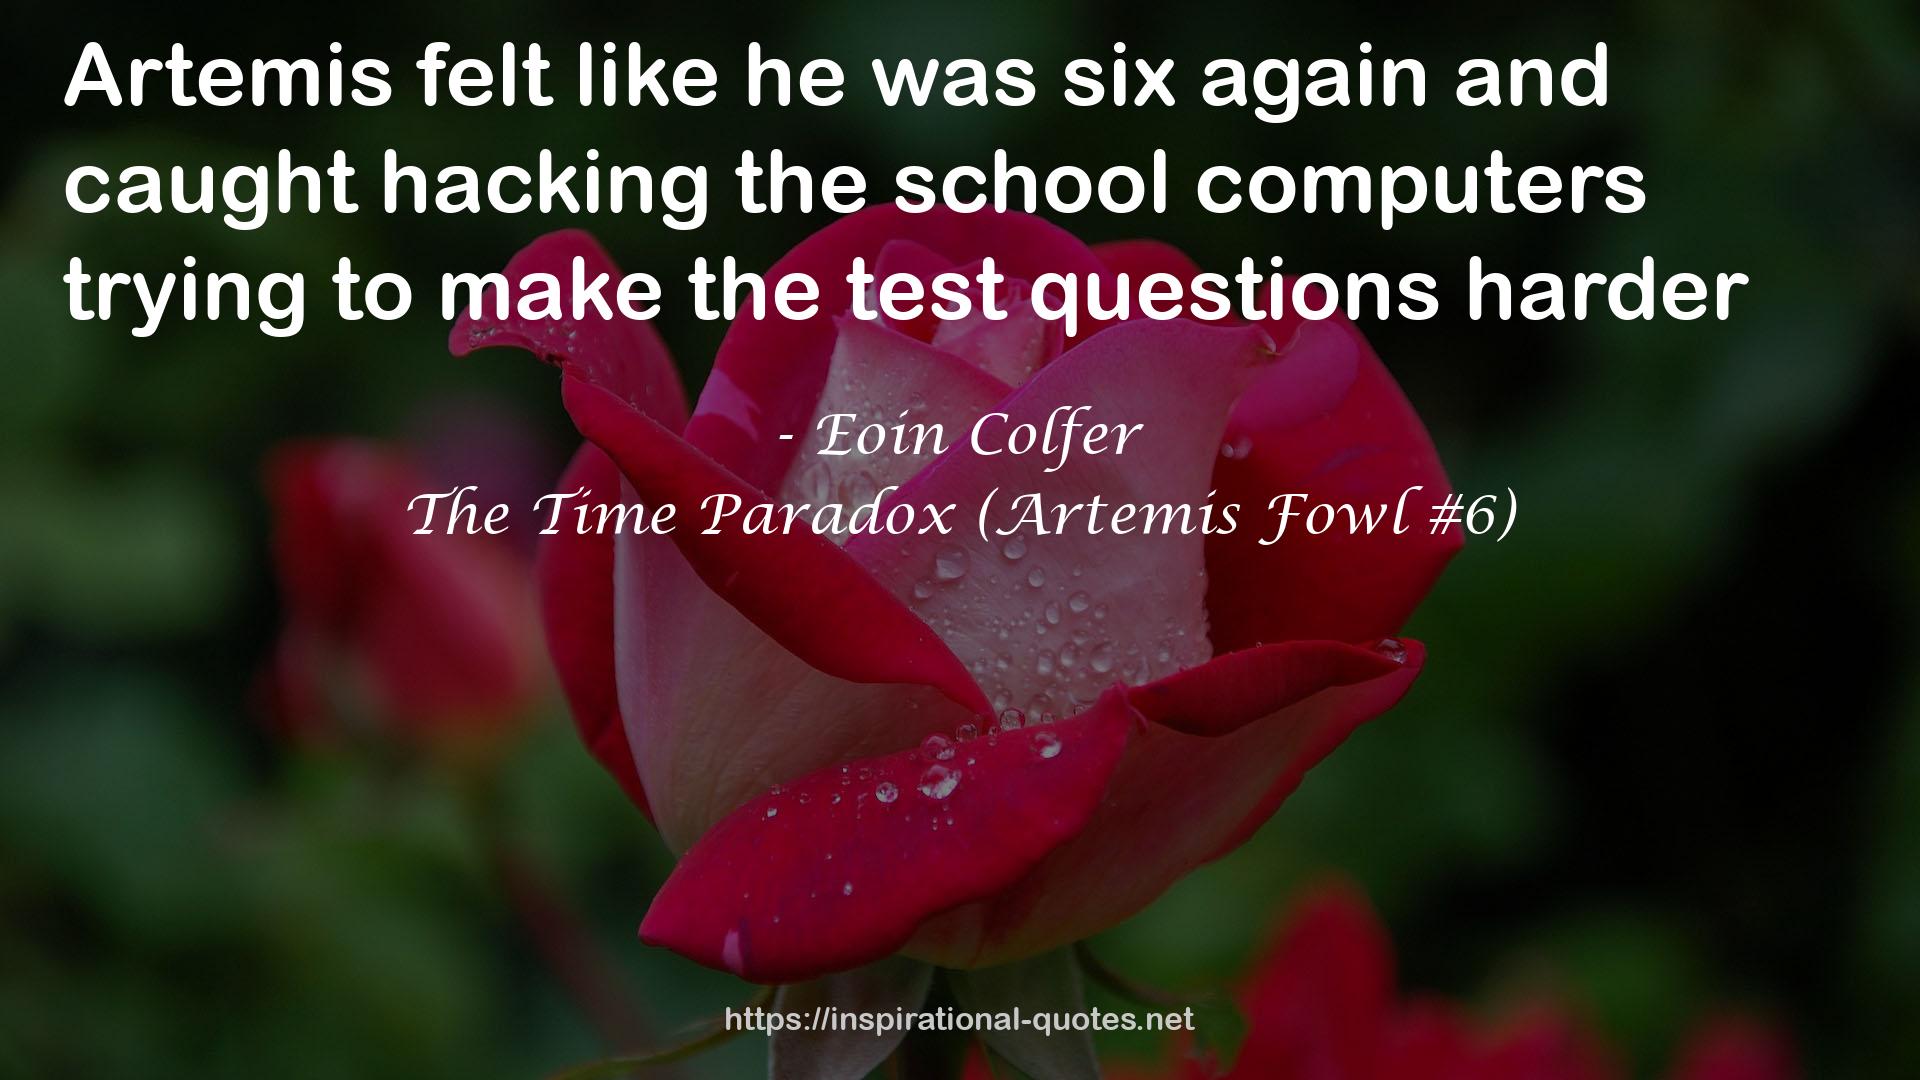 The Time Paradox (Artemis Fowl #6) QUOTES